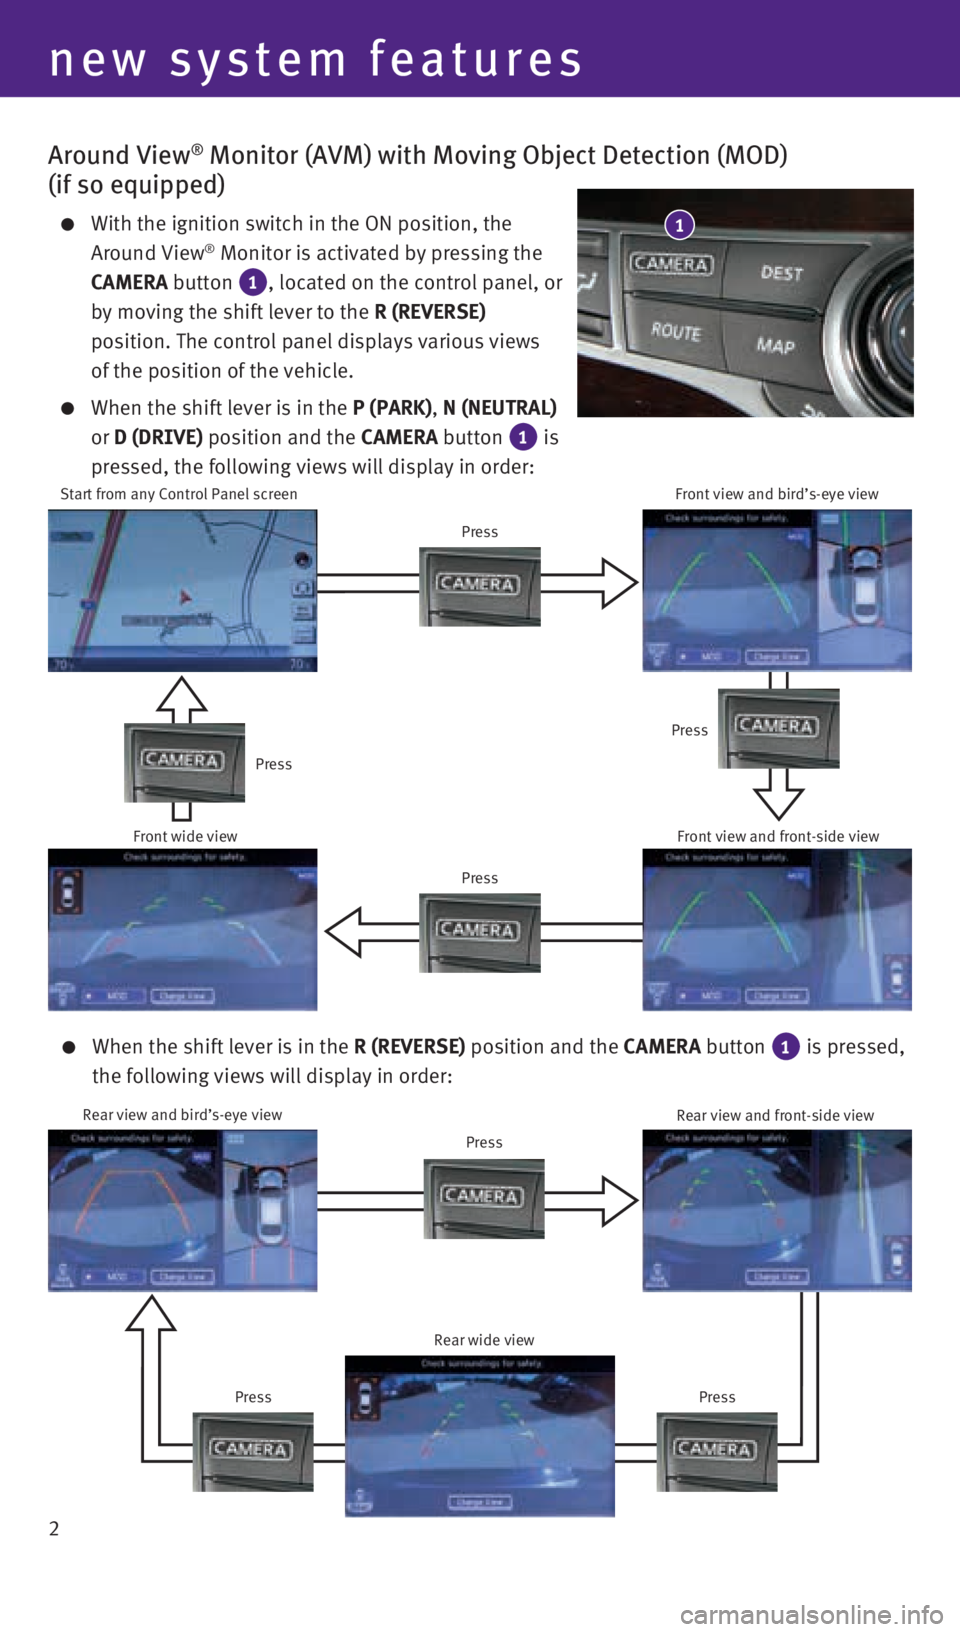 INFINITI Q70 HYBRID 2016  Quick Reference Guide 2
Press
Around View® Monitor (AVM) with Moving Object Detection (MOD) 
(if so equipped)
     With the ignition switch in the ON position, the 
Around View® Monitor is activated by pressing the 
CAME